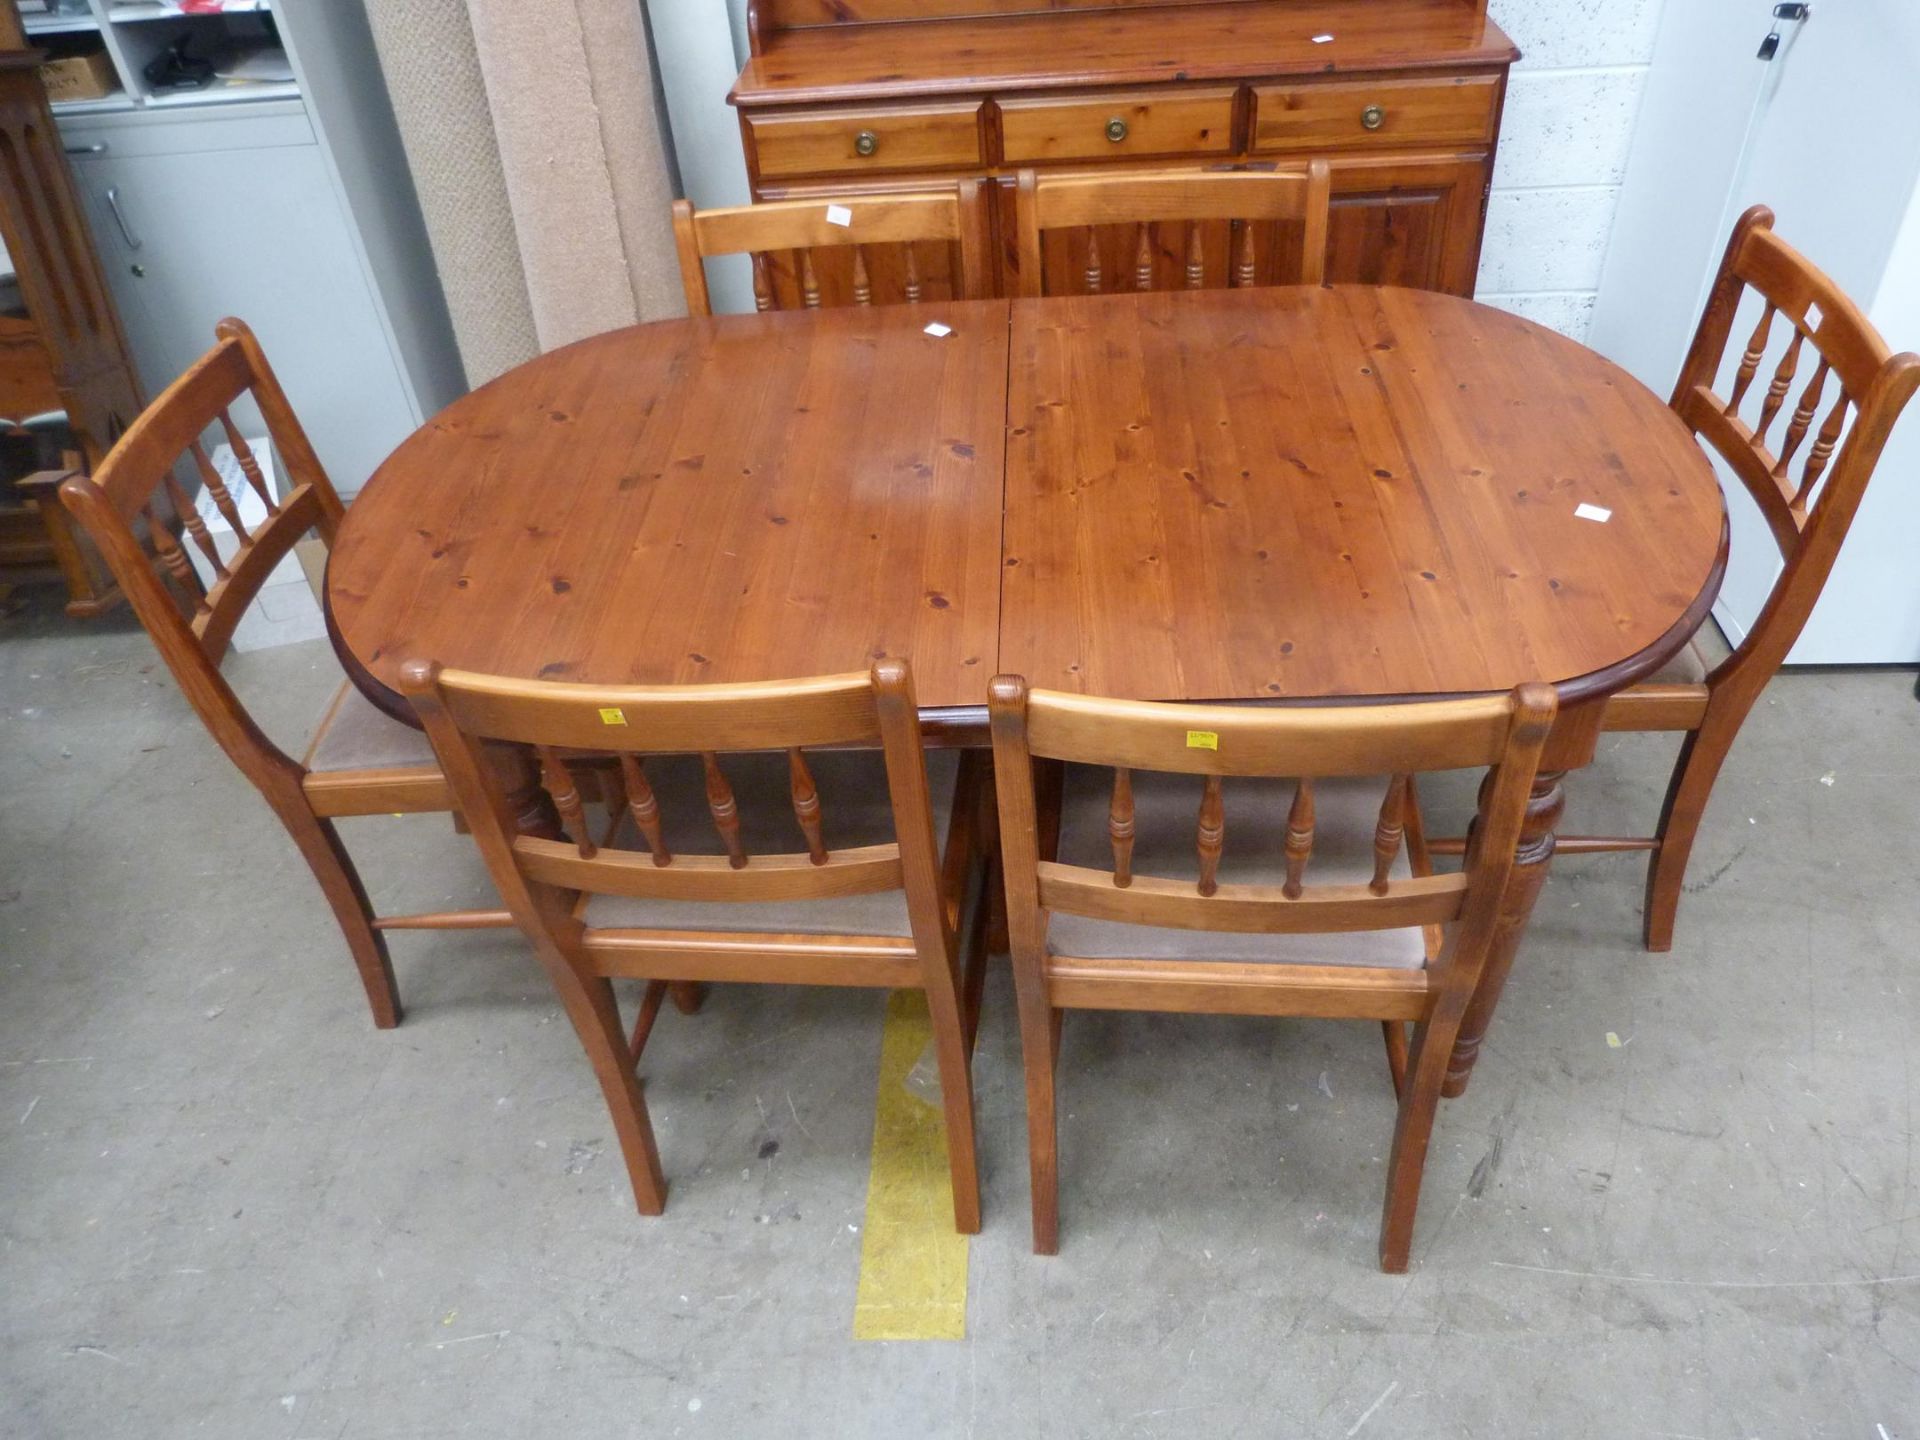 A Solid Pine Ducal Dining Table with six Chairs (Table W 90cm, L 190cm (open), L 154cm (closed) - Image 2 of 5